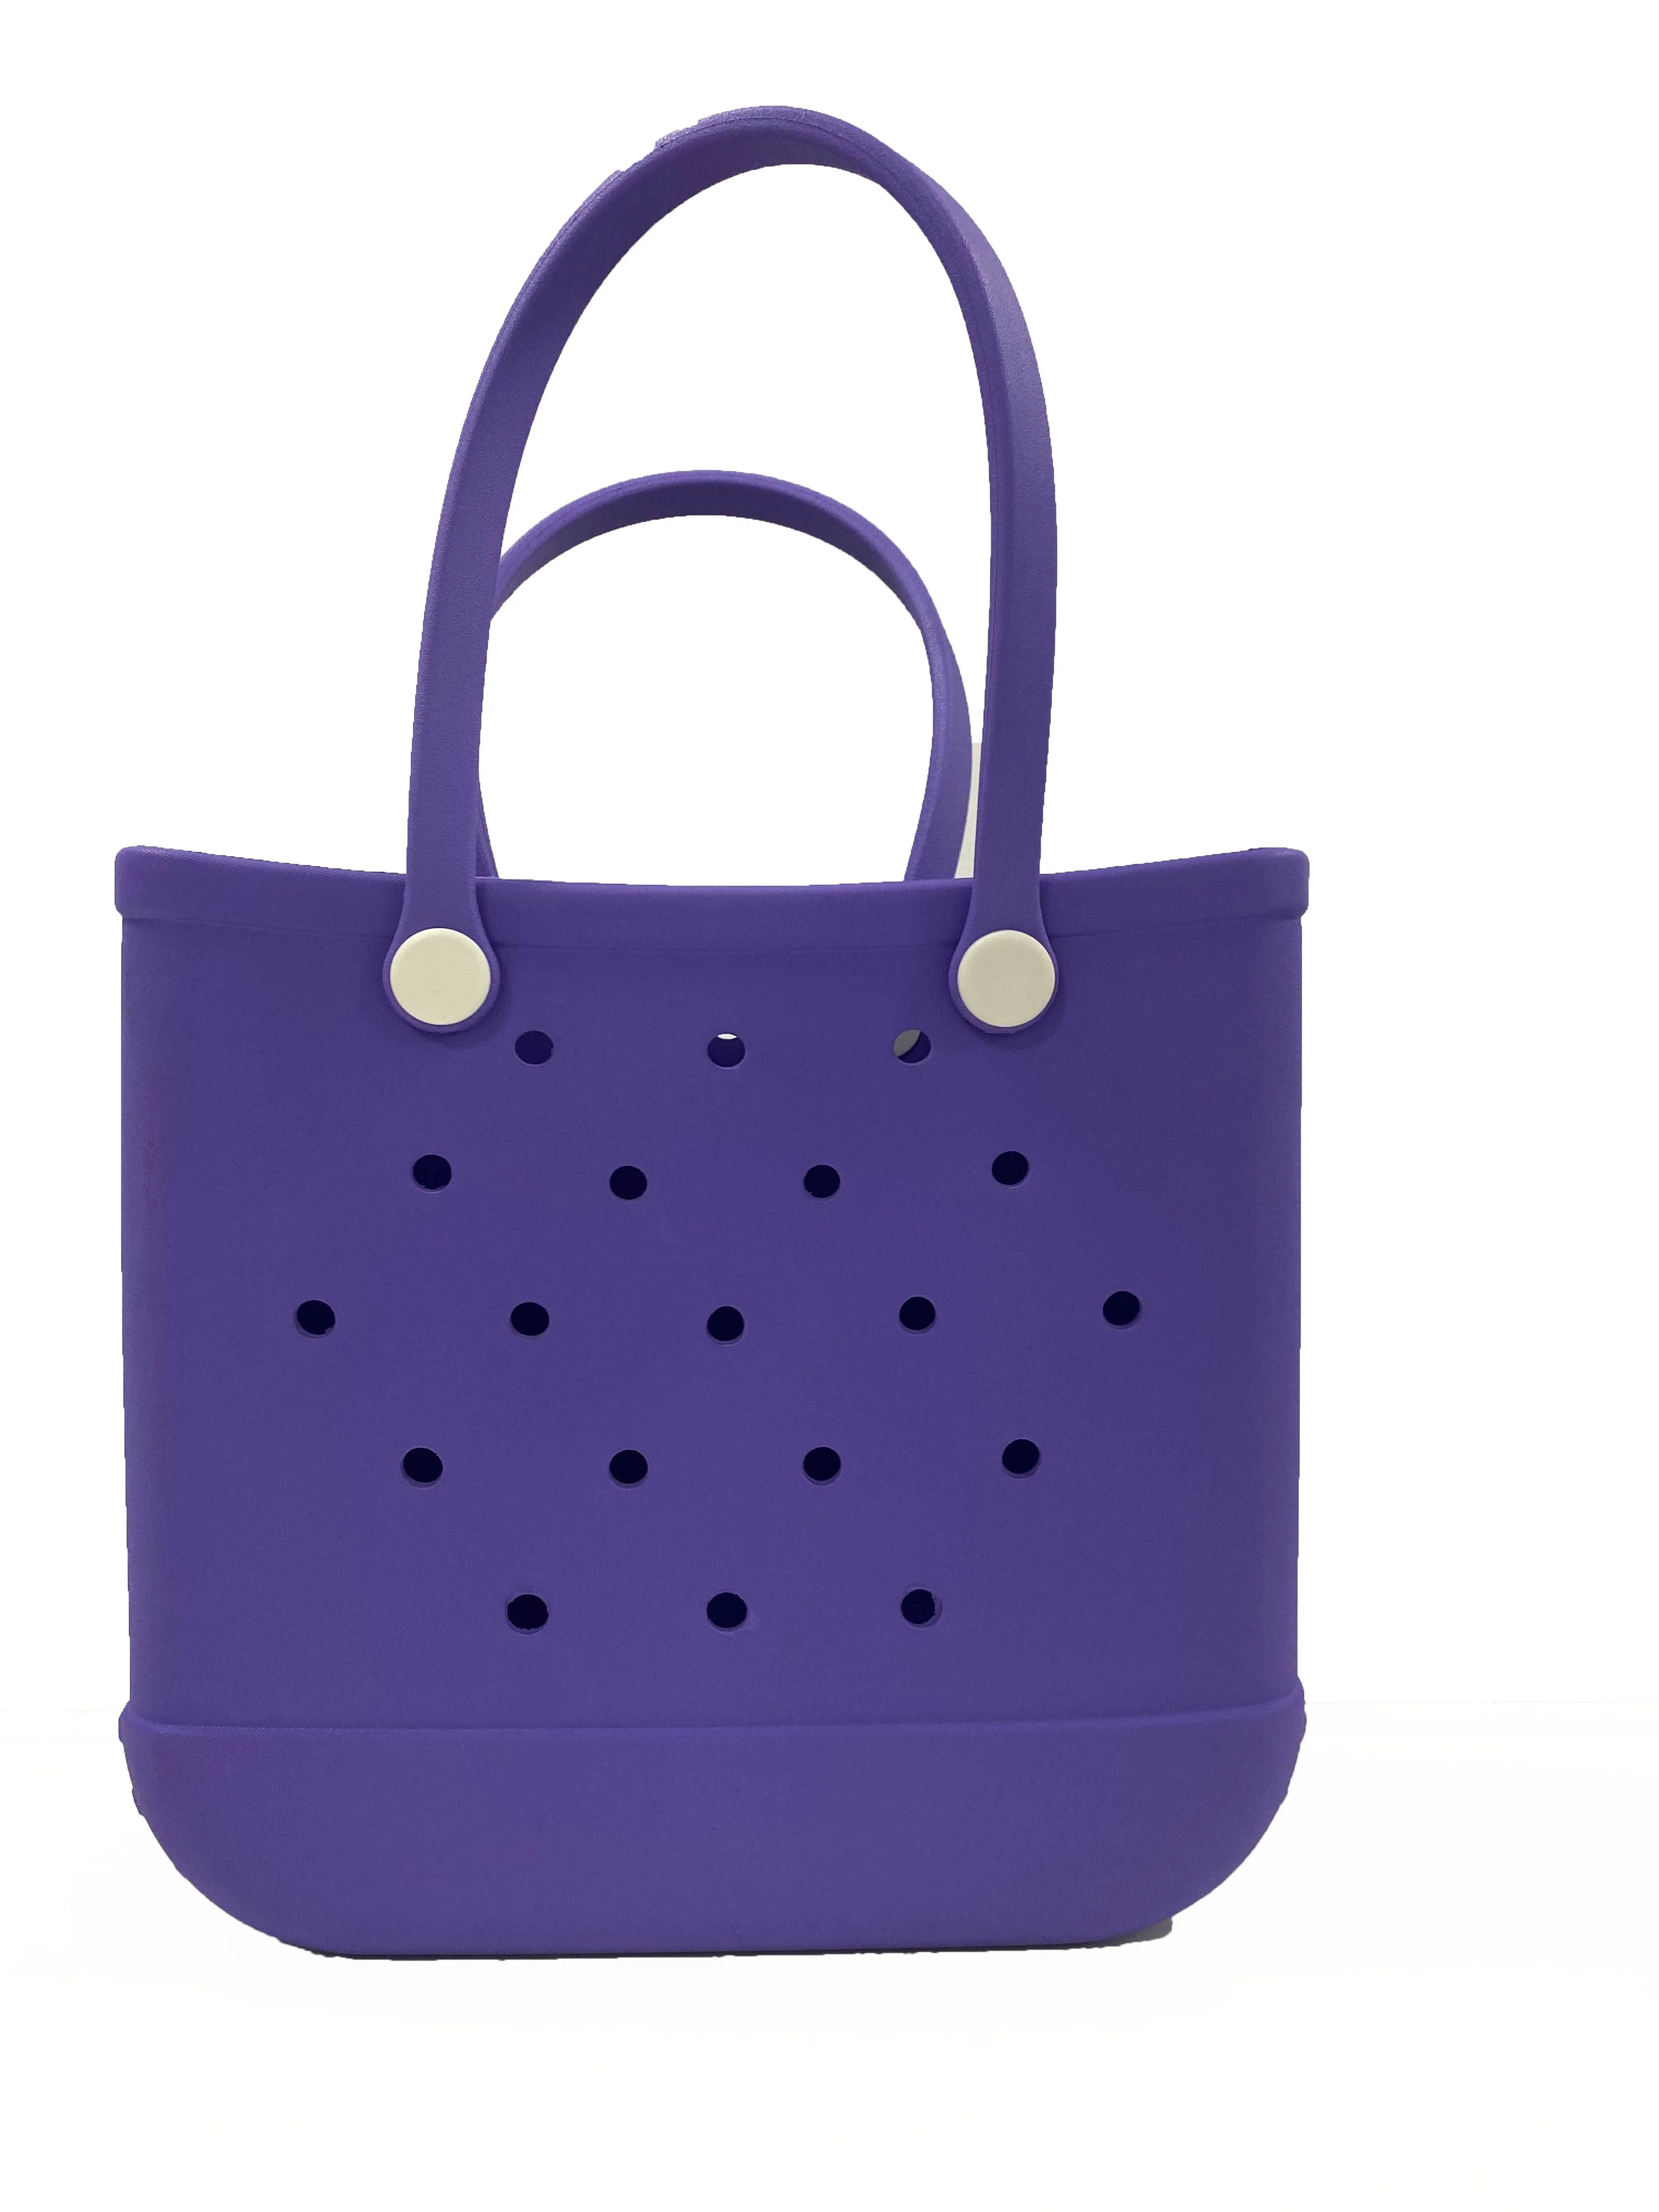 Houston We Have A Purple bogg bag, Best Price and Reviews